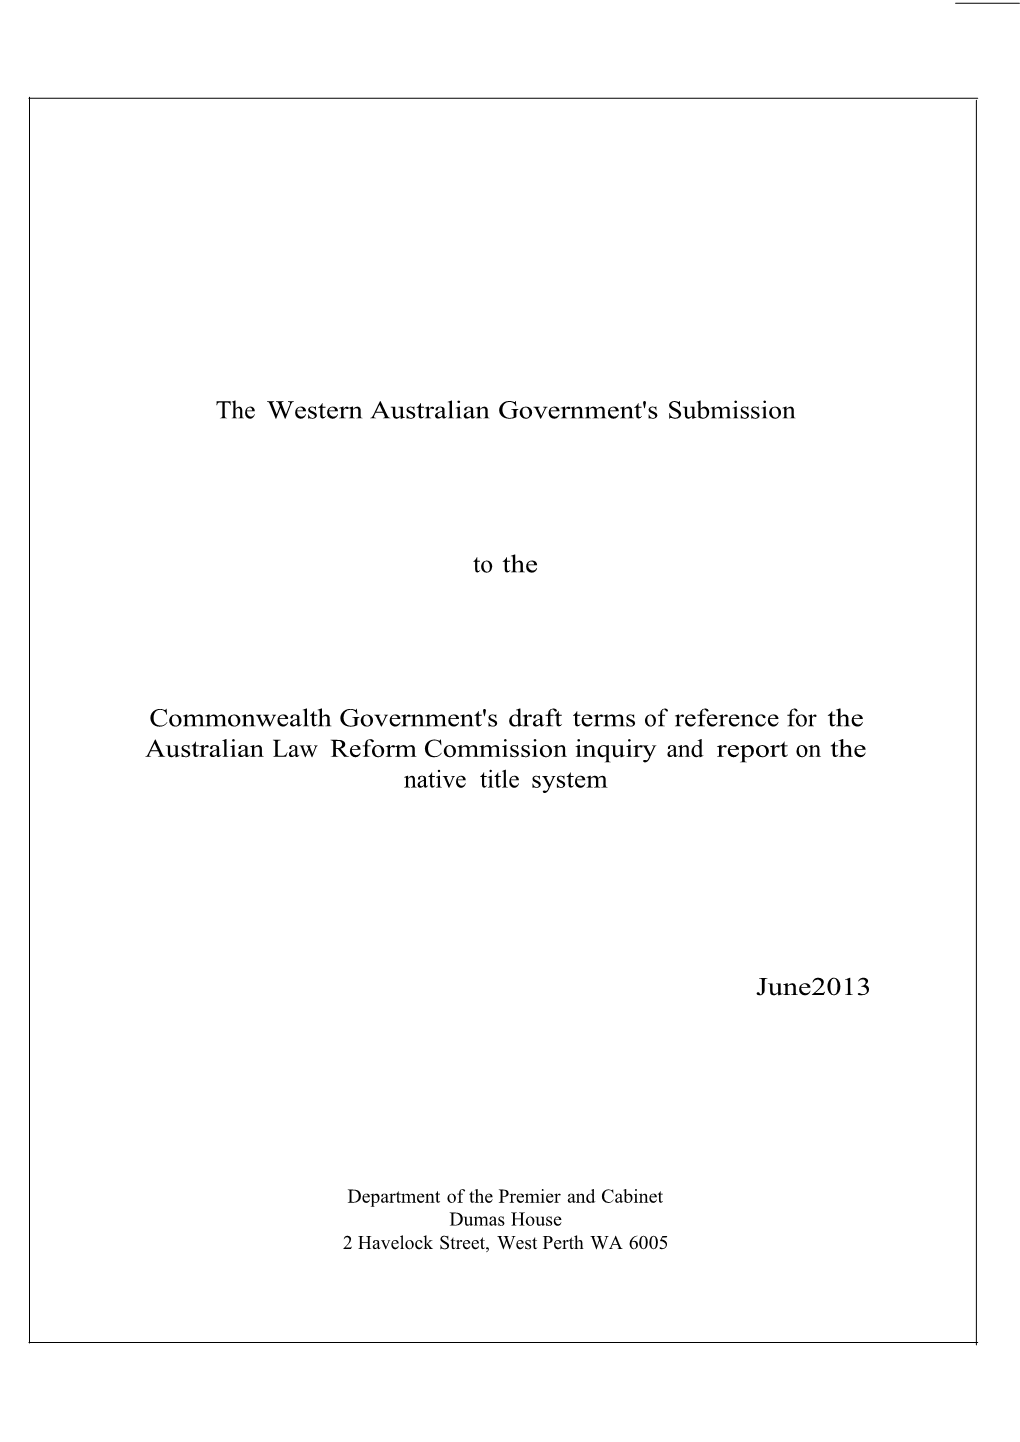 Thewesternaustraliangovernment'ssubmission